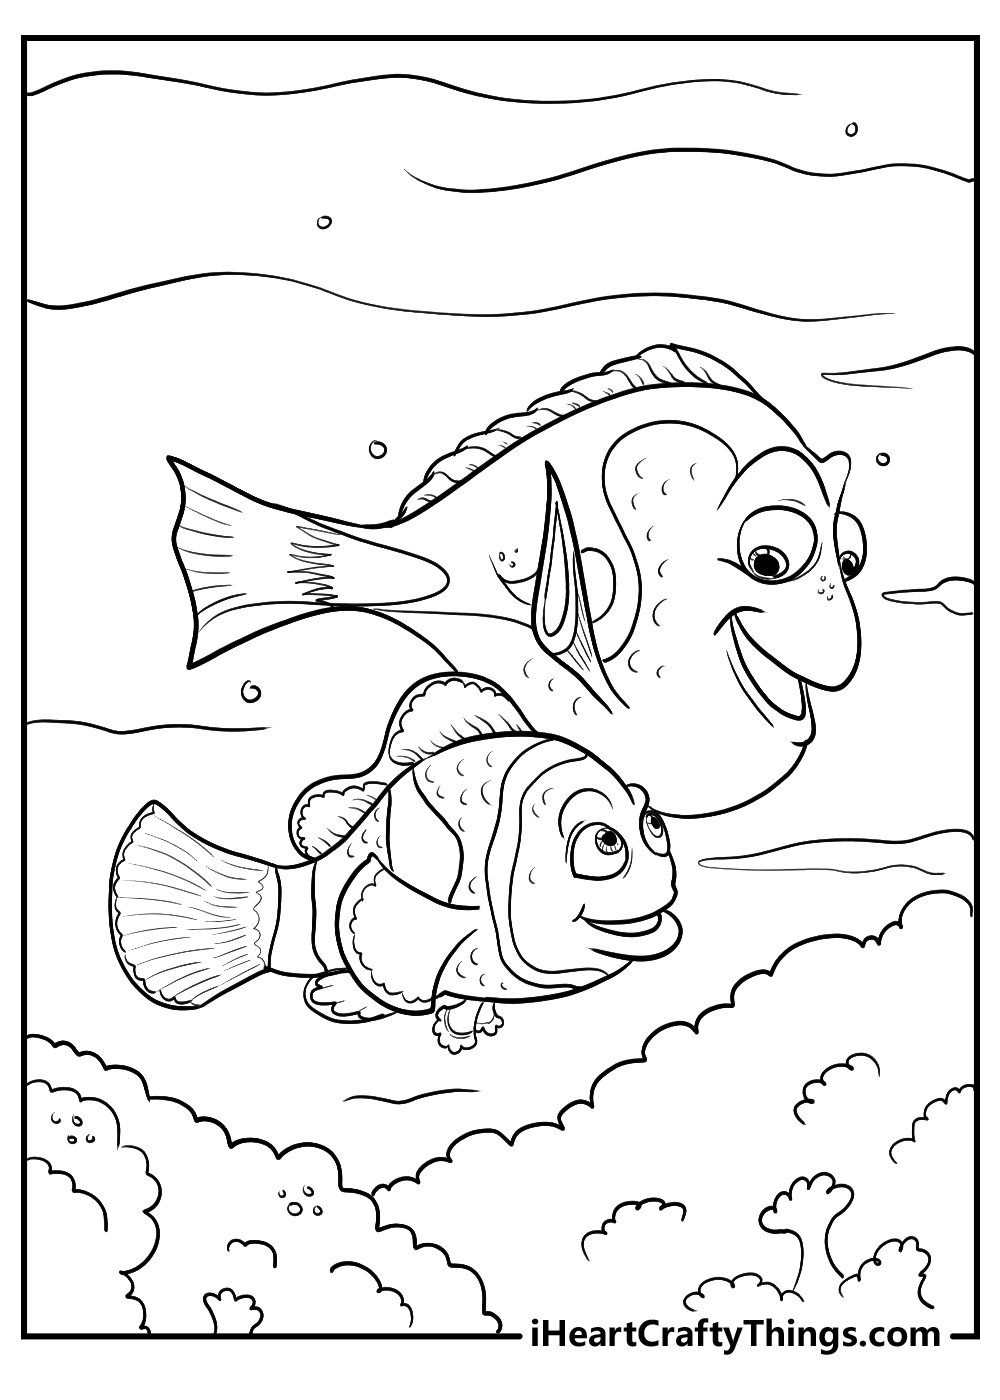 finding nemo coloring pages